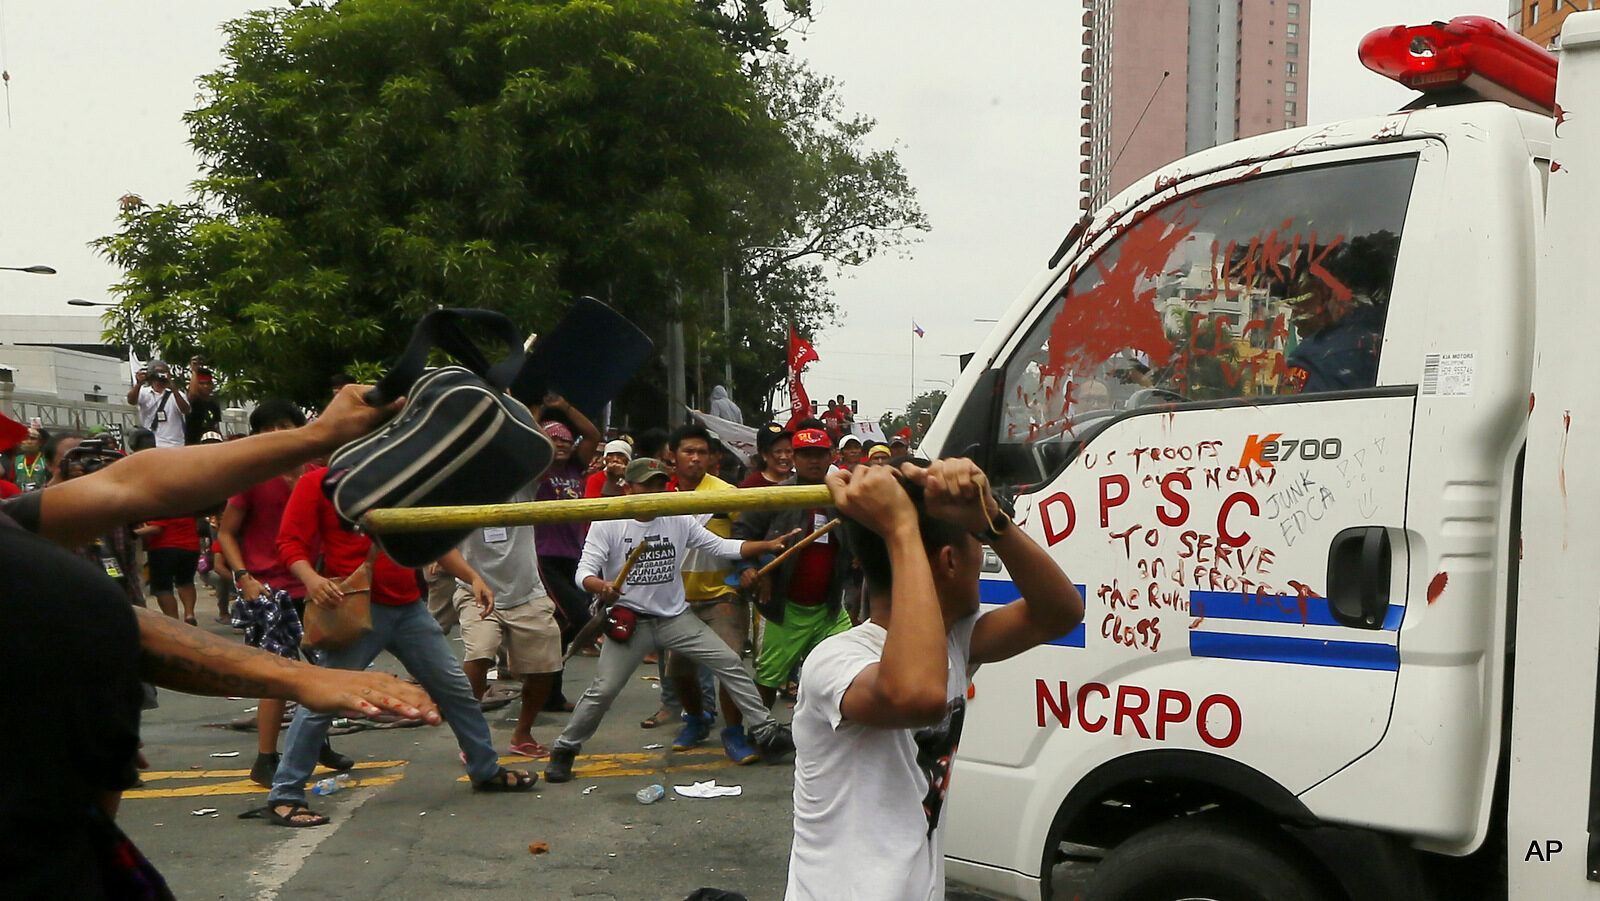 Protesters hit a Philippine National Police van after it rammed into protesters outside the U.S. Embassy in Manila Wednesday, Oct. 19, 2016. The police van rammed into protesters, leaving several bloodied, as an anti-U.S. rally turned violent Wednesday at the embassy. The protesters, consisting of students, workers and tribespeople, were demanding an end to the presence of visiting U.S. troops in the Philippines and to support a call by President Rodrigo Duterte for a foreign policy not dependent on the U.S., the country's longtime treaty ally.